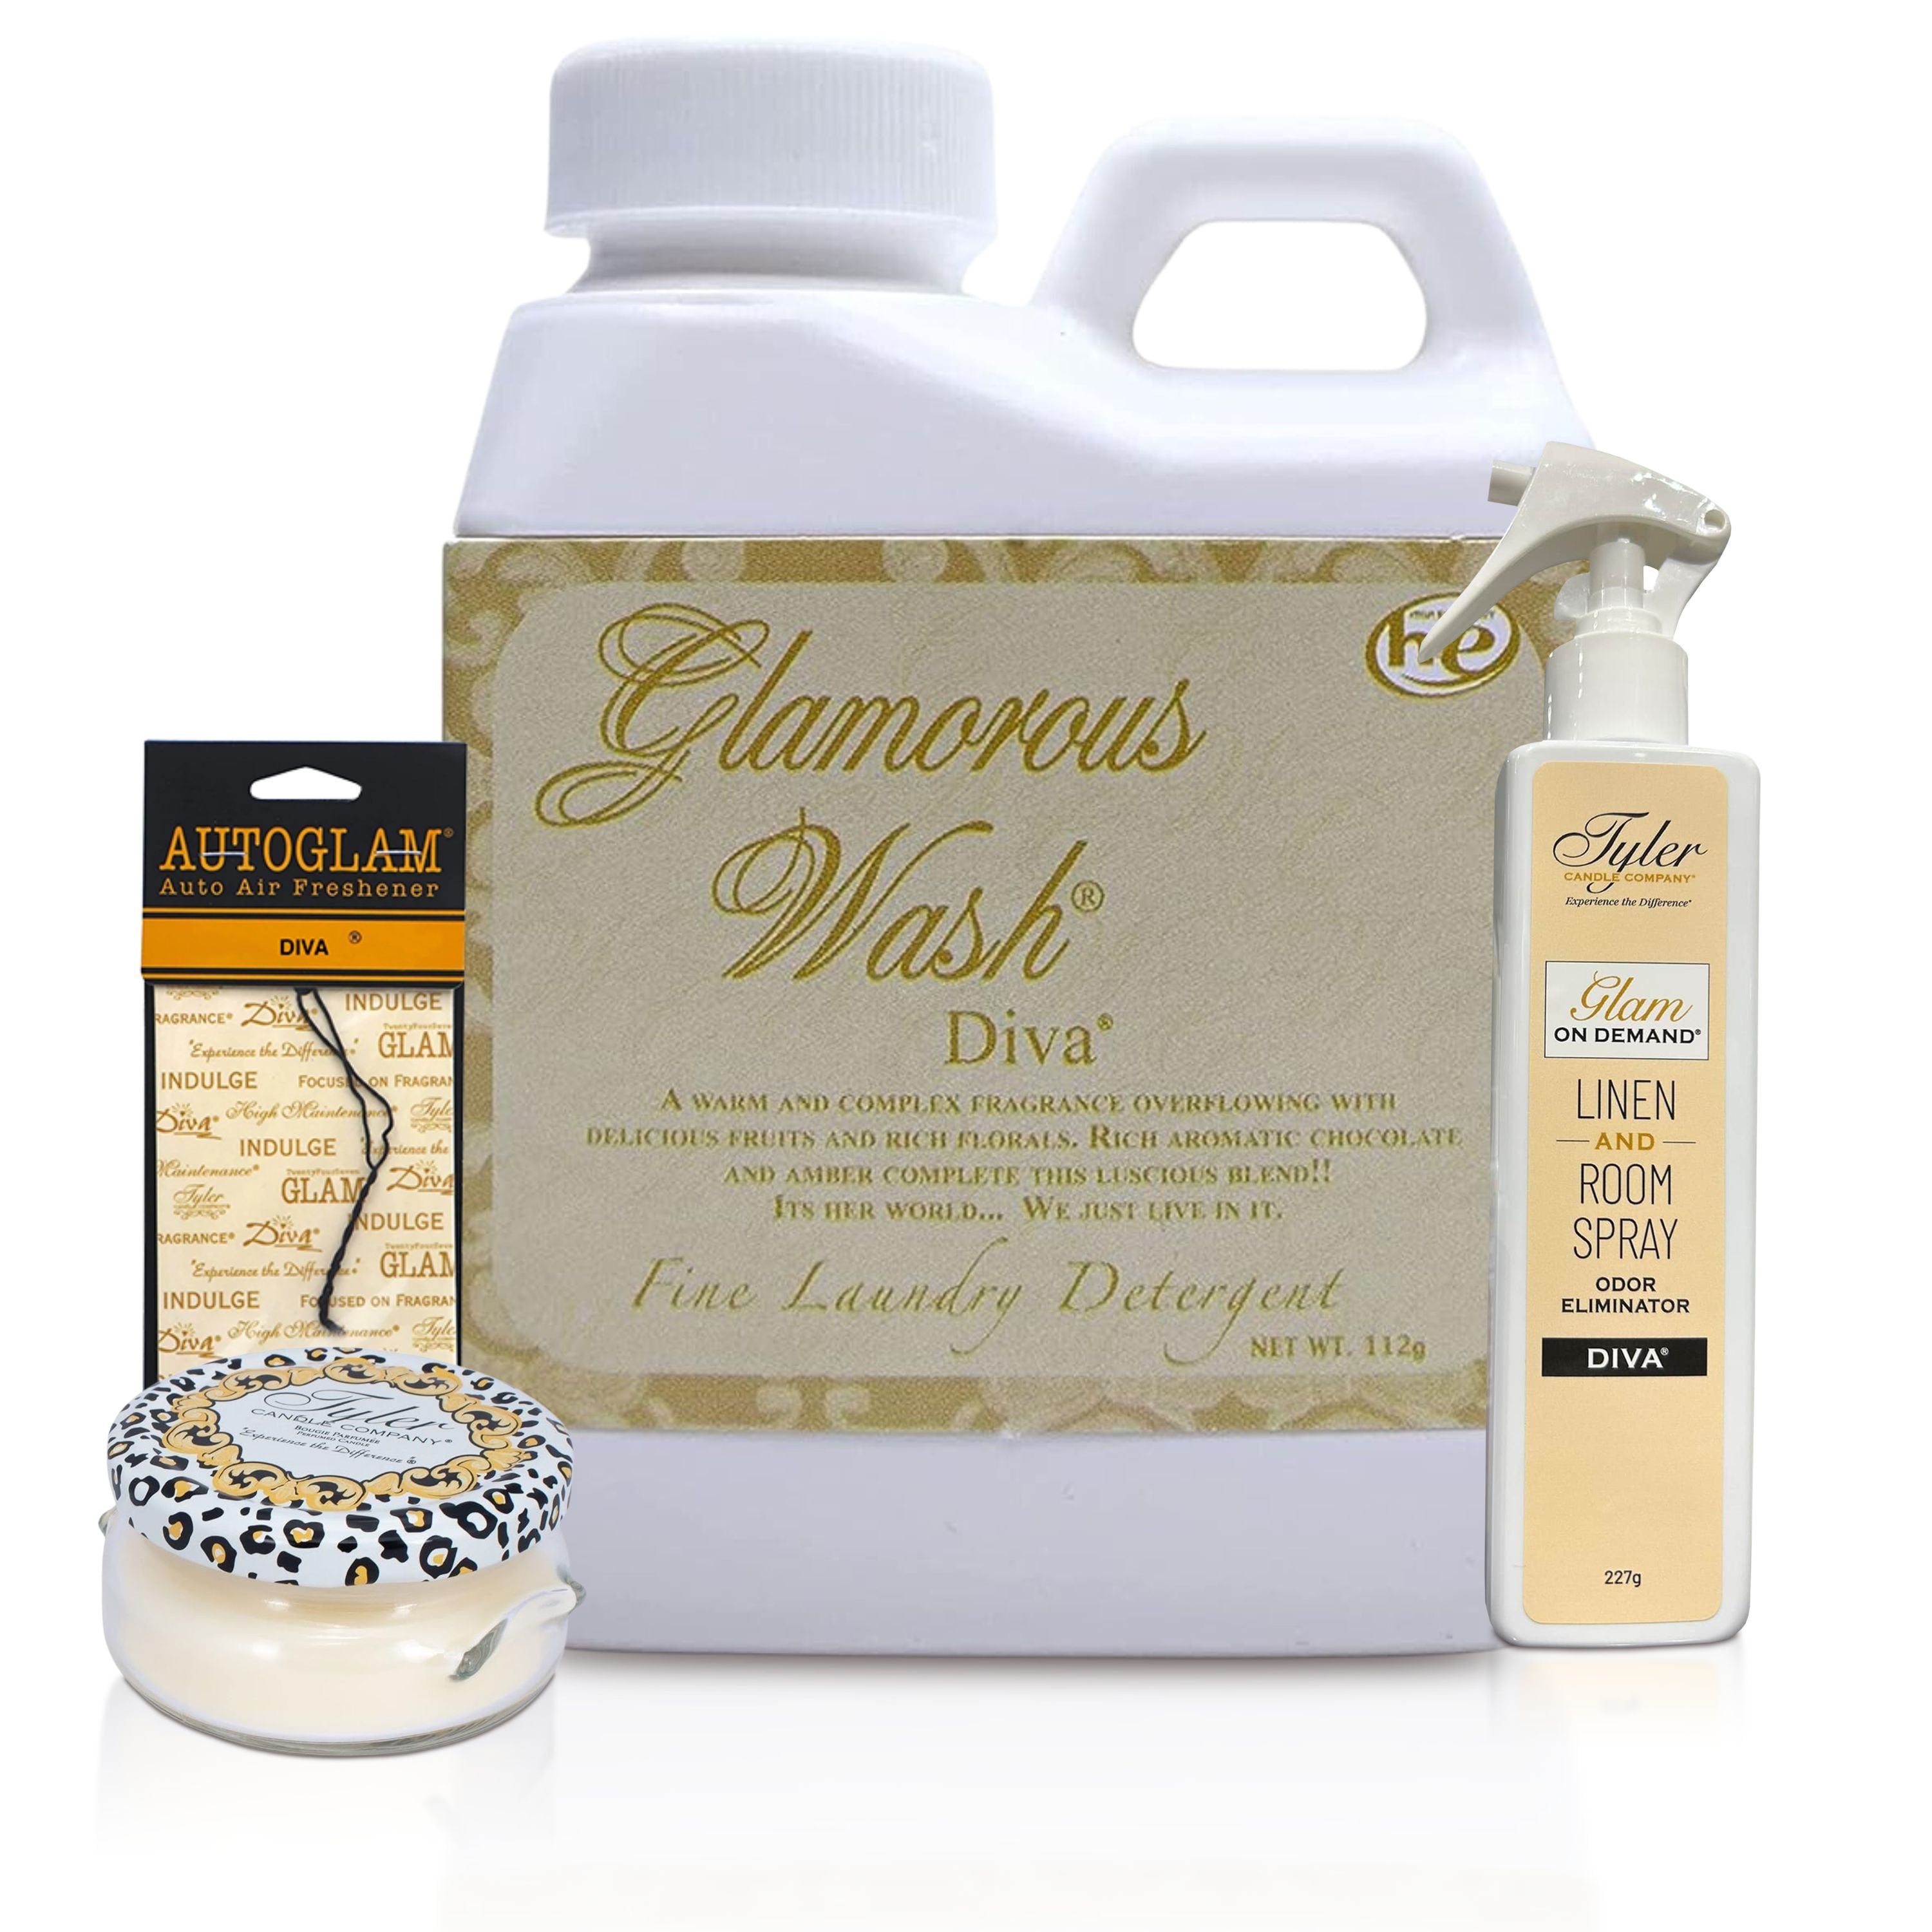 Tyler Candle Company Glamorous Gift Suite VI - Diva Scent - 4-Piece Gift Pack - 227g Glam On Demand Spray Bottle, 3oz Prestige Candle, 112g Glamorous Wash Laundry Detergent, Autoglam Auto Air Freshener - Pack of 1